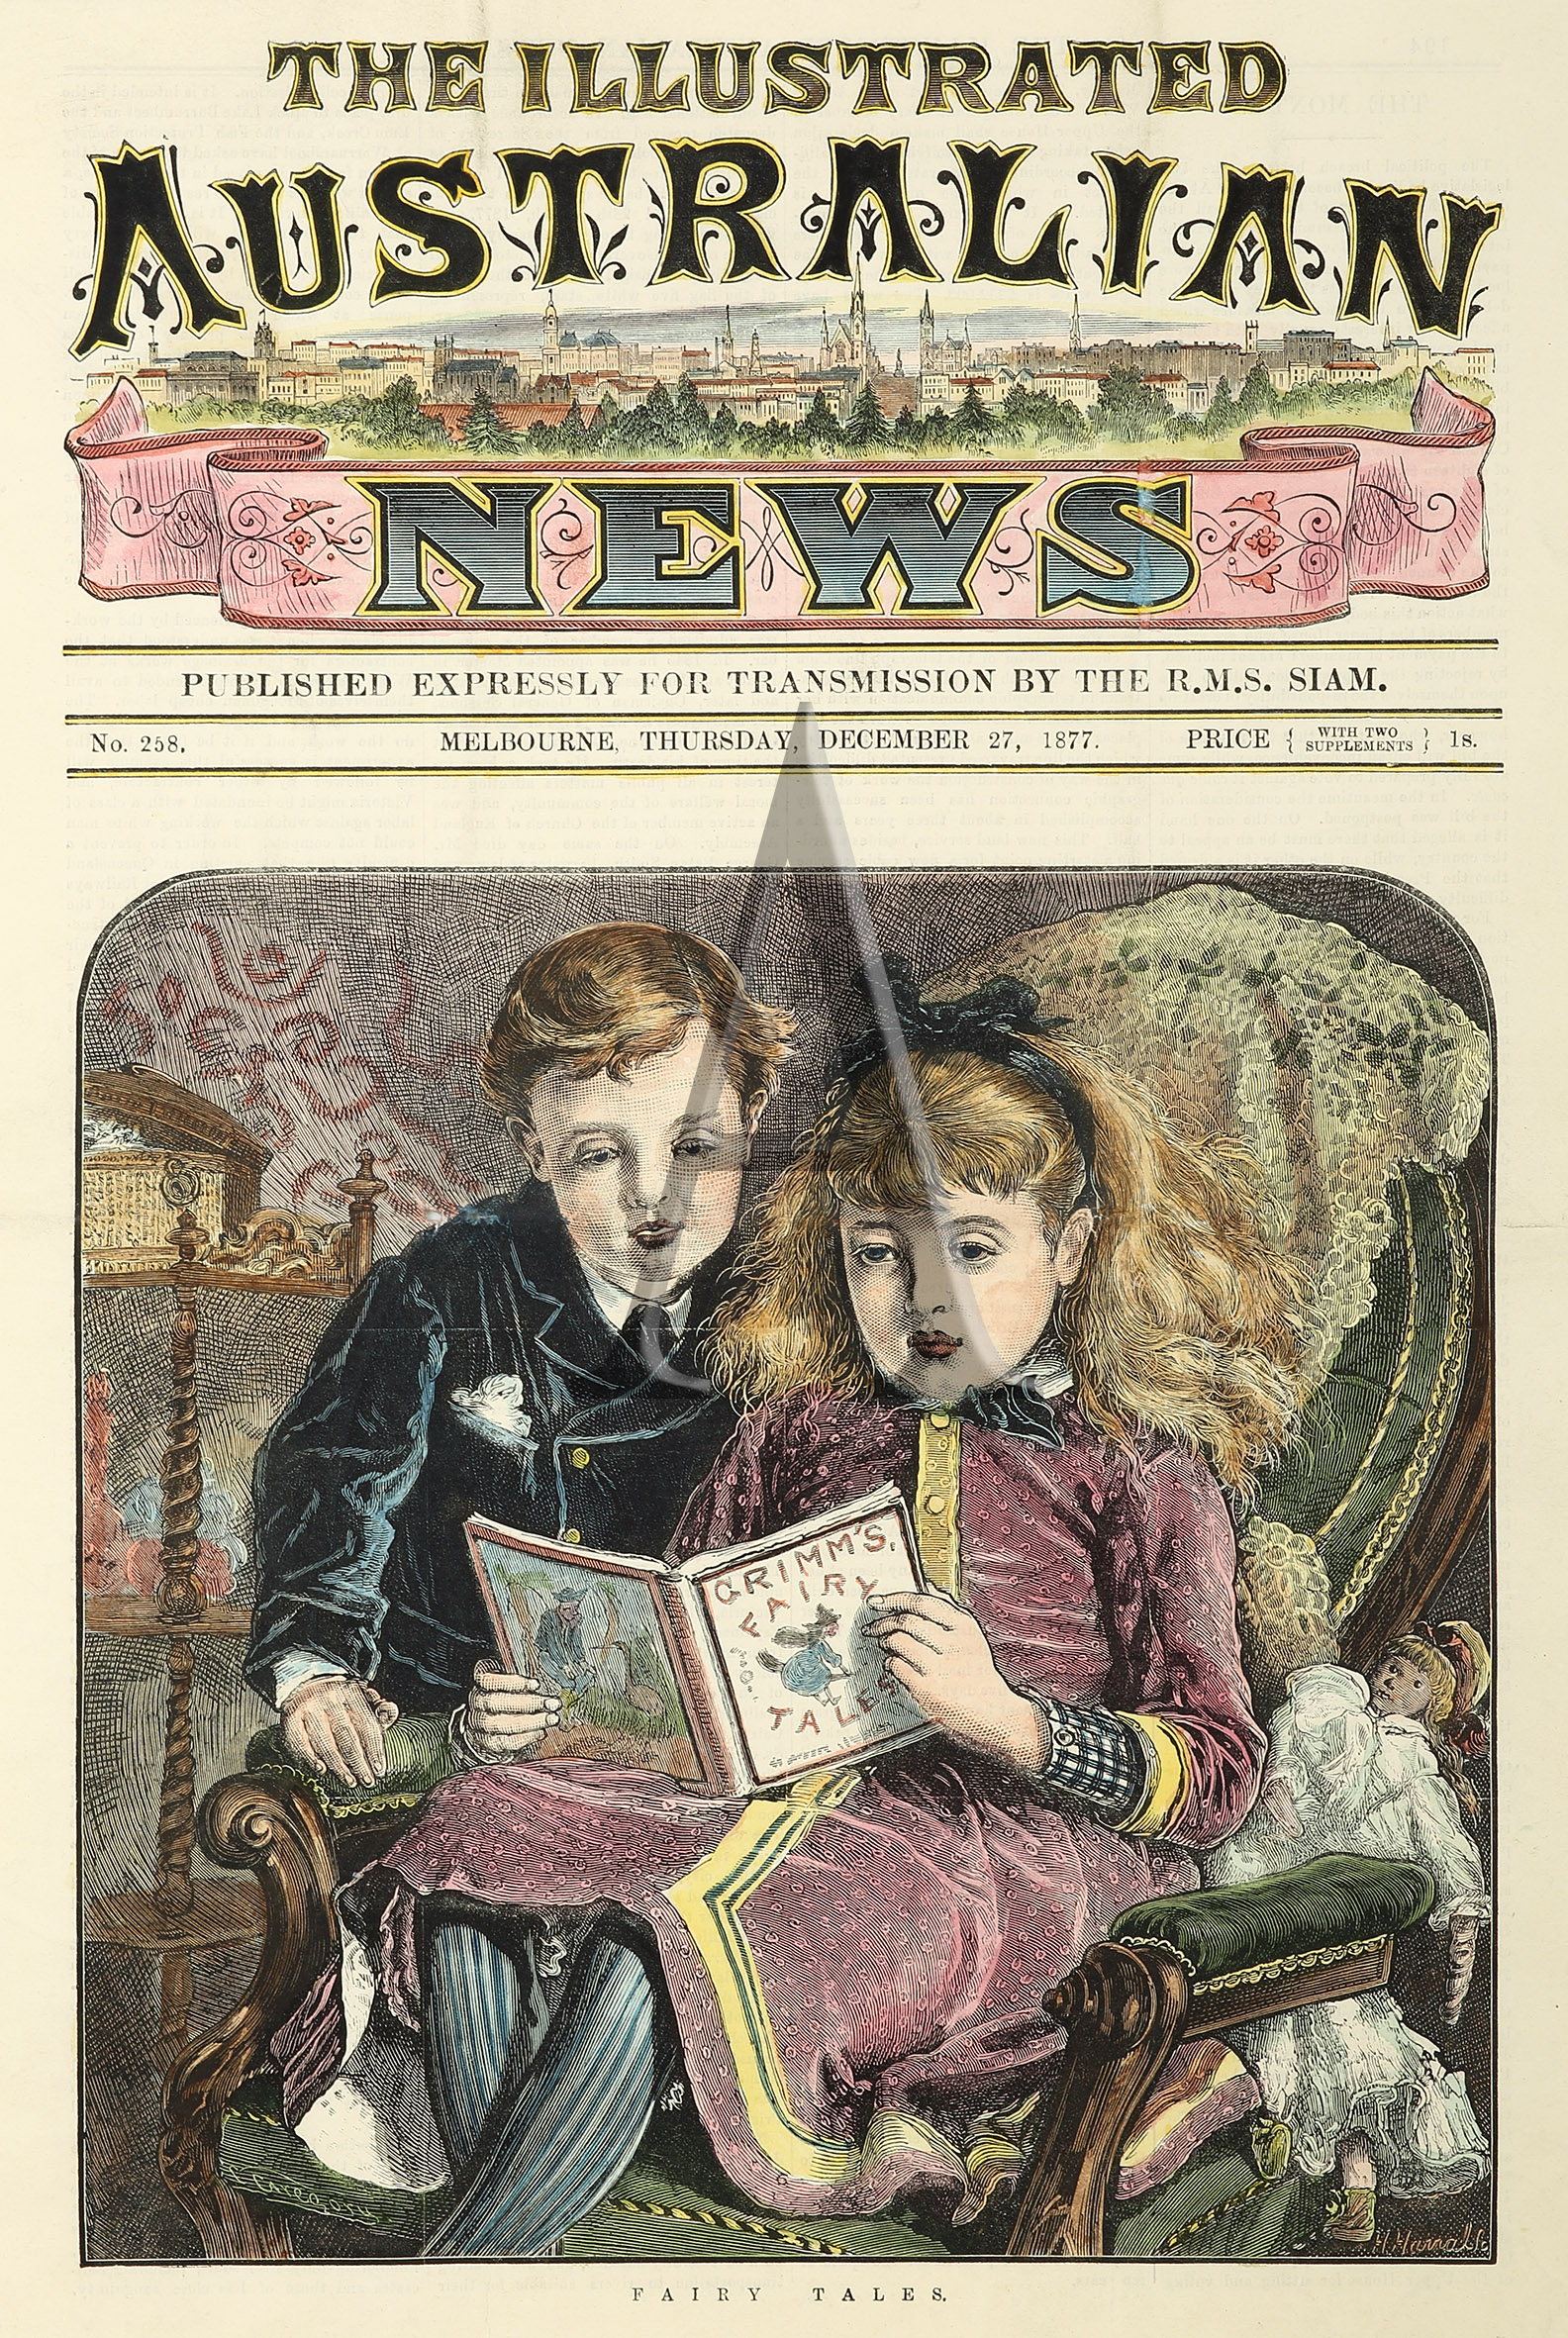 Fairy Tales. - Antique Print from 1877